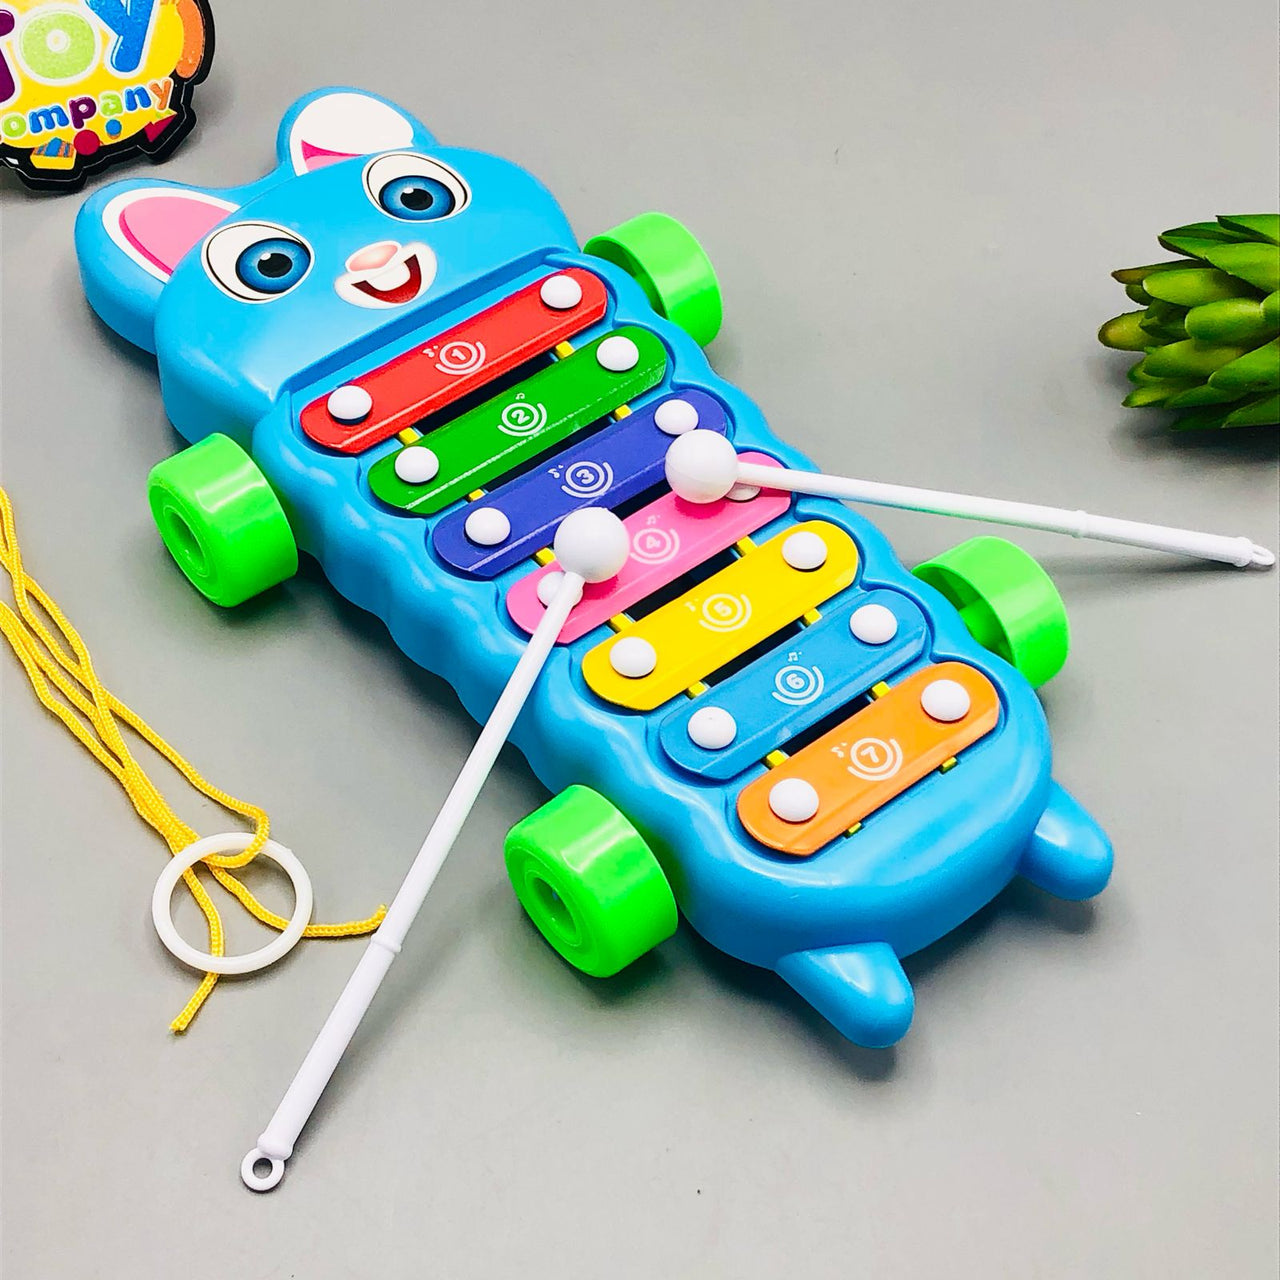 Happy Xylophone Pull Along Toy